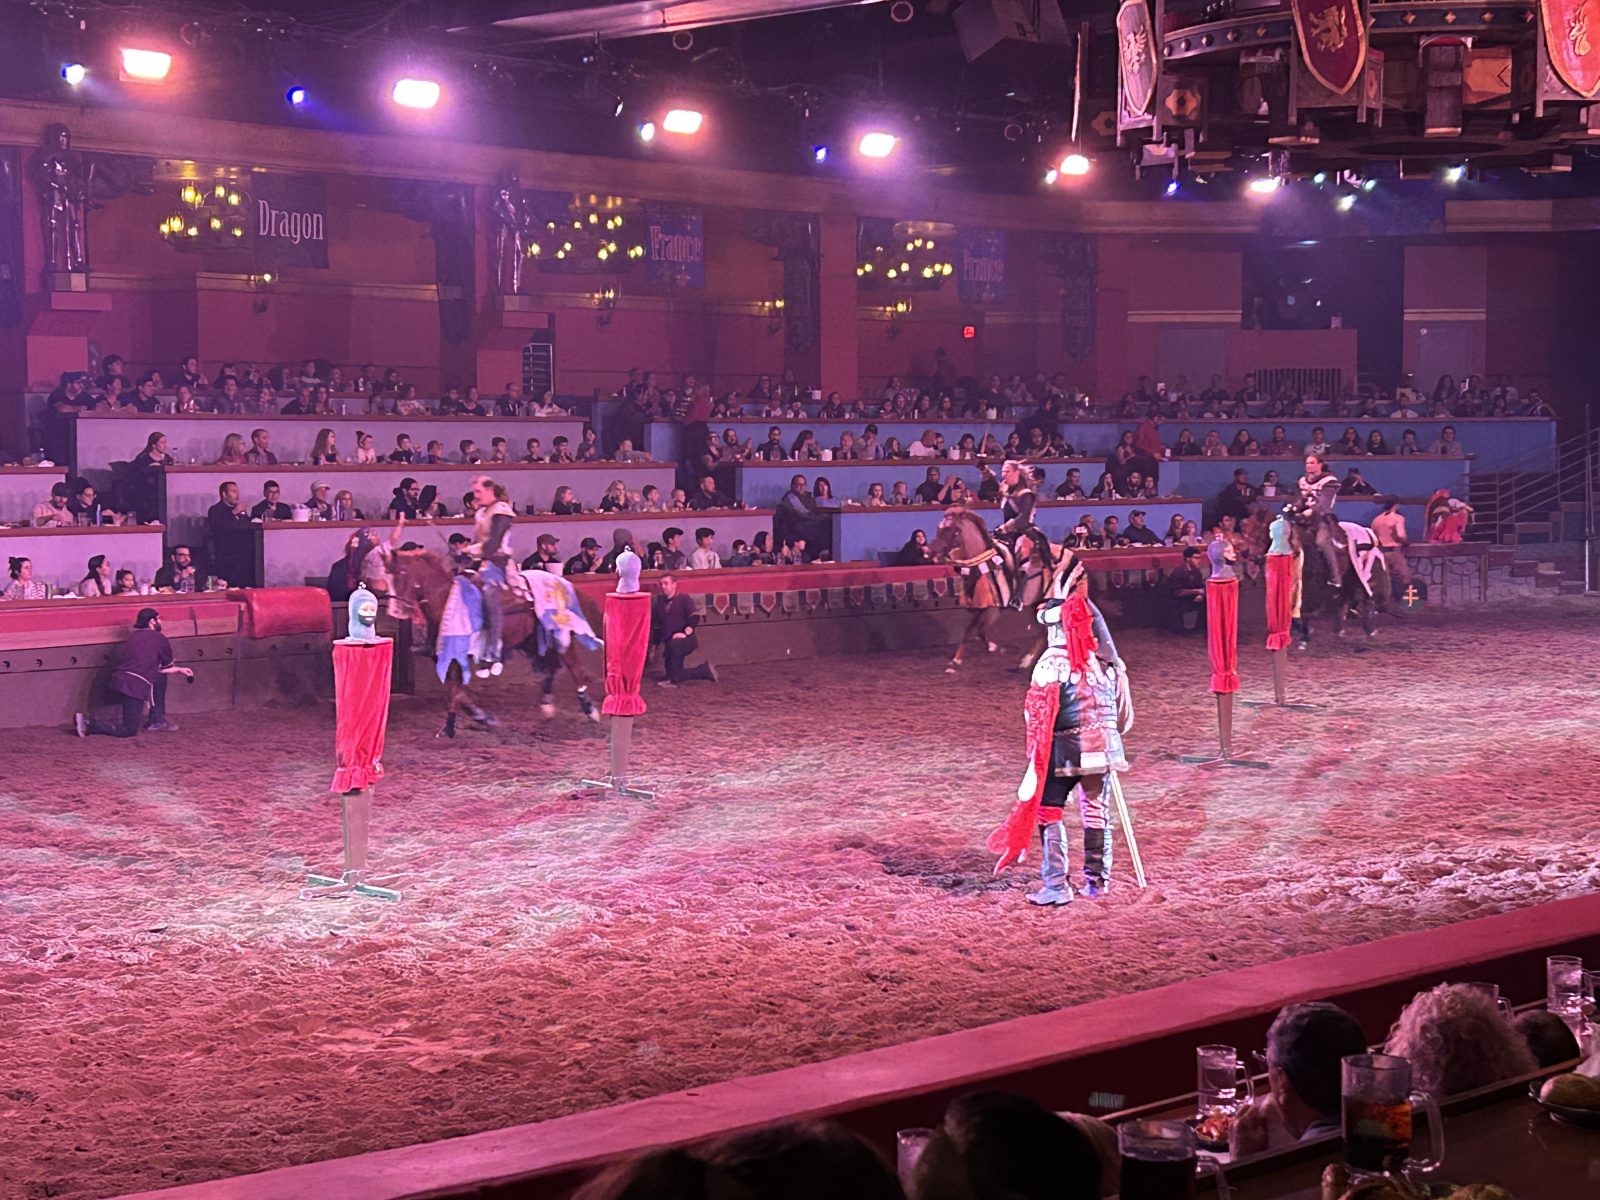 Tournament of Kings dinner and show in Las Vegas